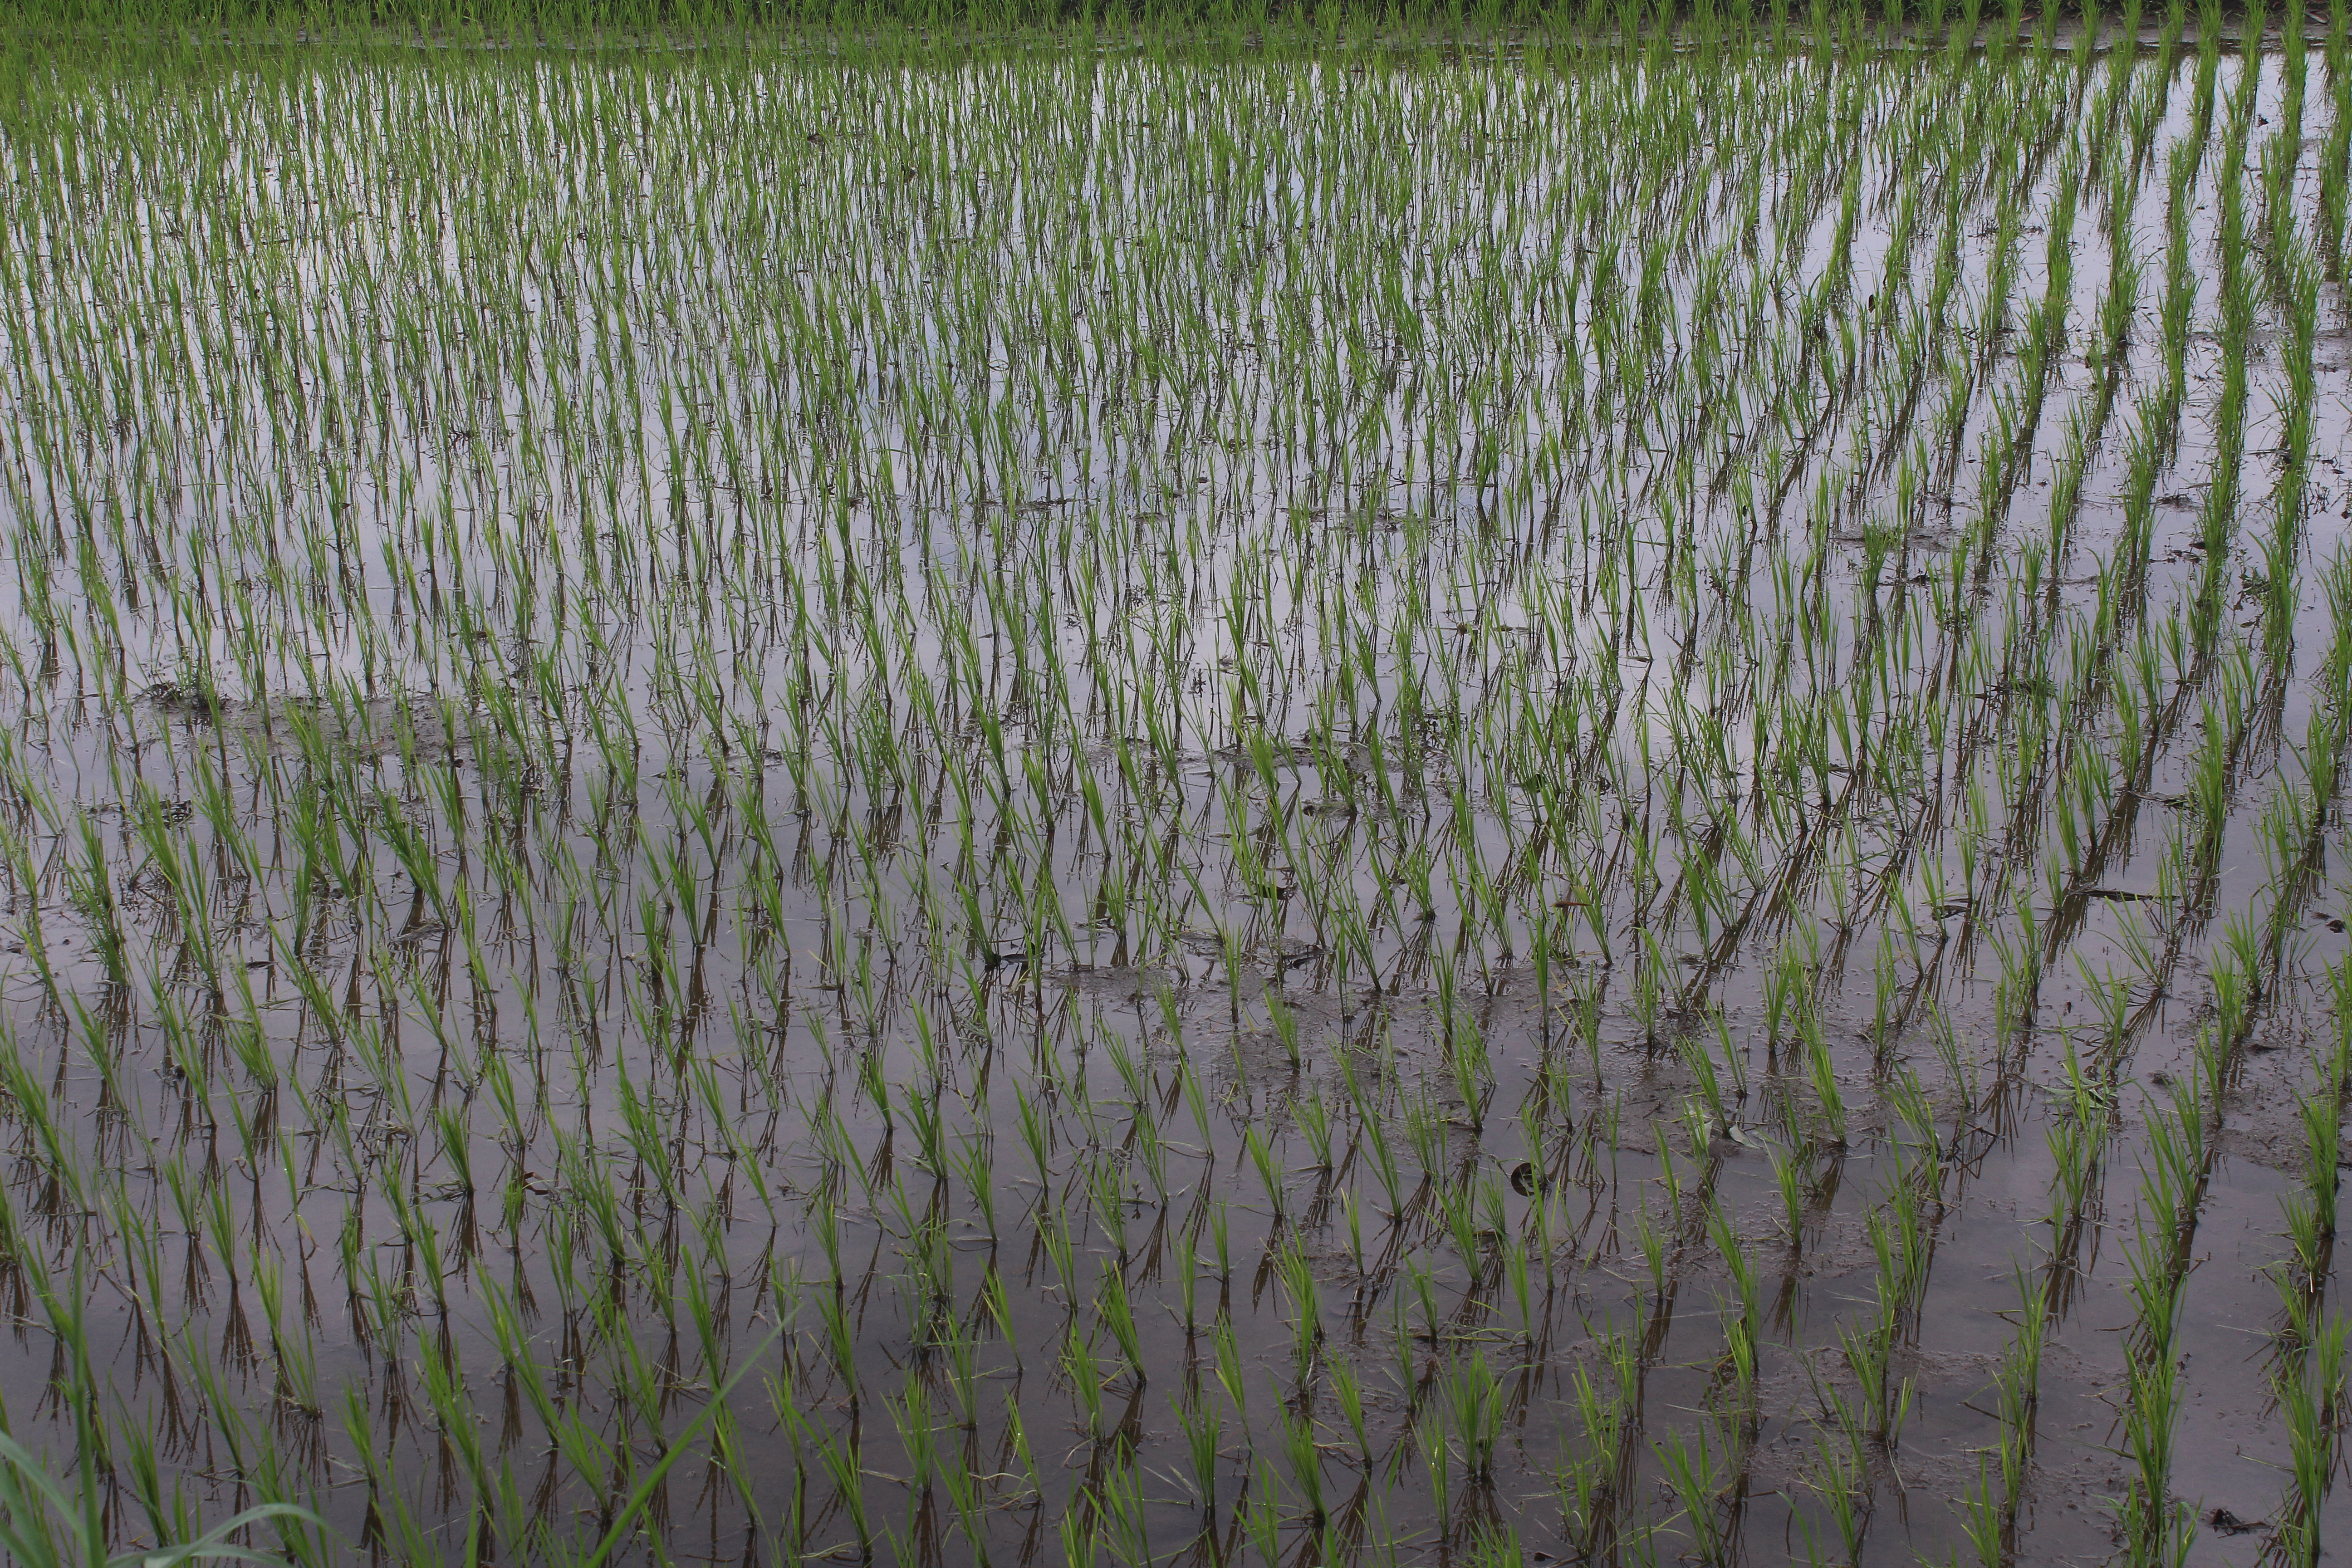 Wet rice paddy close up